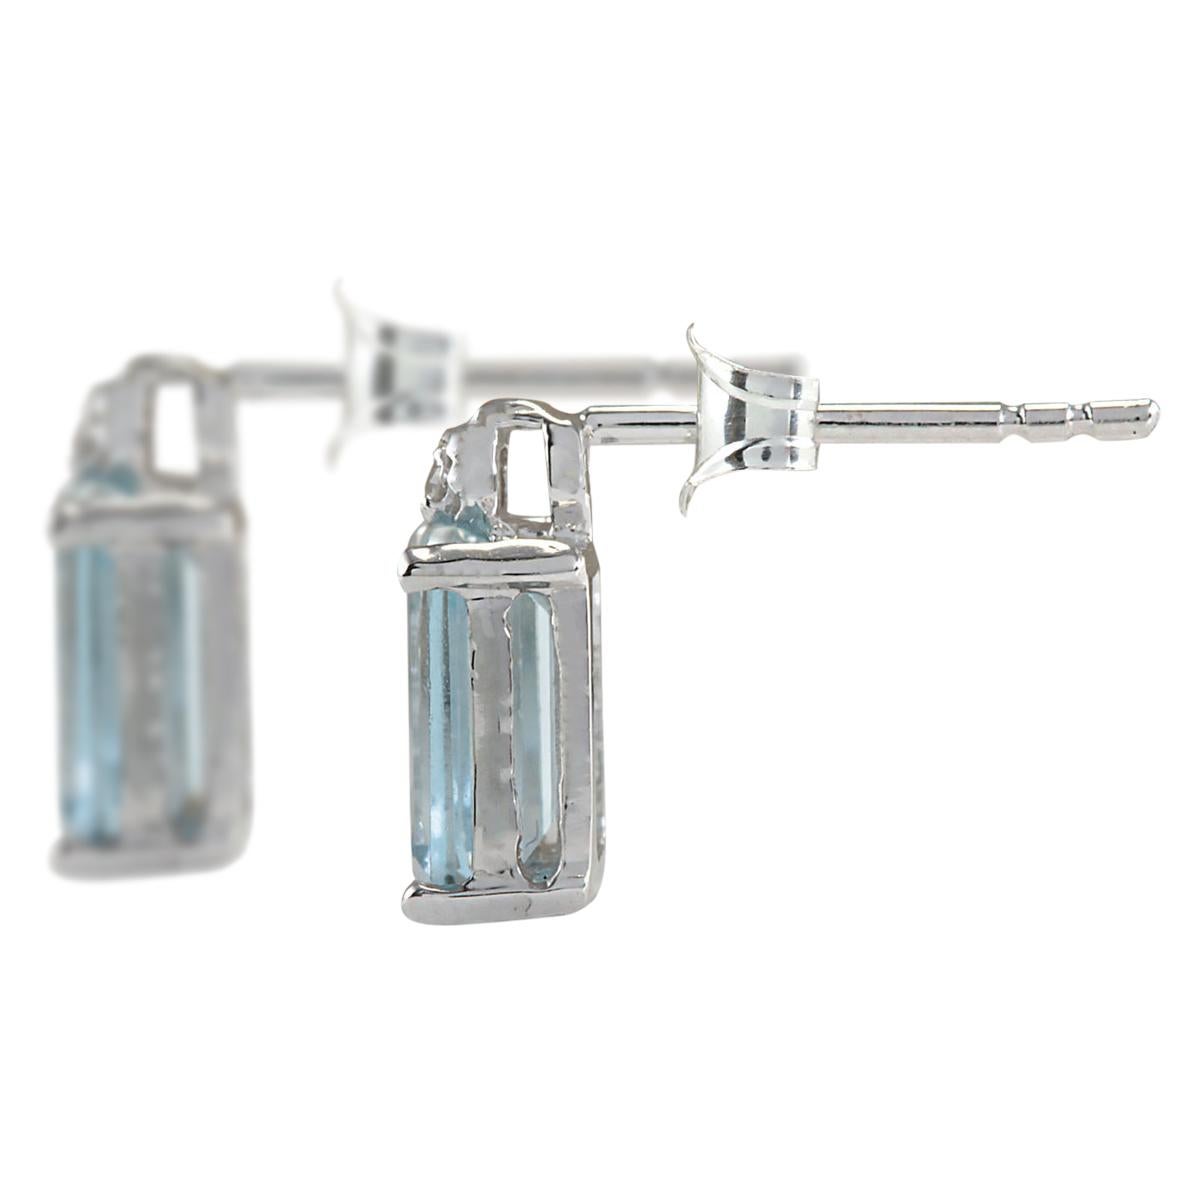 Stamped: 14K White Gold
Total Earrings Weight: 1.4 Grams
Total Natural Aquamarine Weight is 2.00 Carat (Measures: 7.00x5.00 mm)
Color: Blue
Total Natural Diamond Weight is 0.06 Carat
Color: F-G, Clarity: VS2-SI1
Face Measures: 9.75x5.45 mm
Sku: